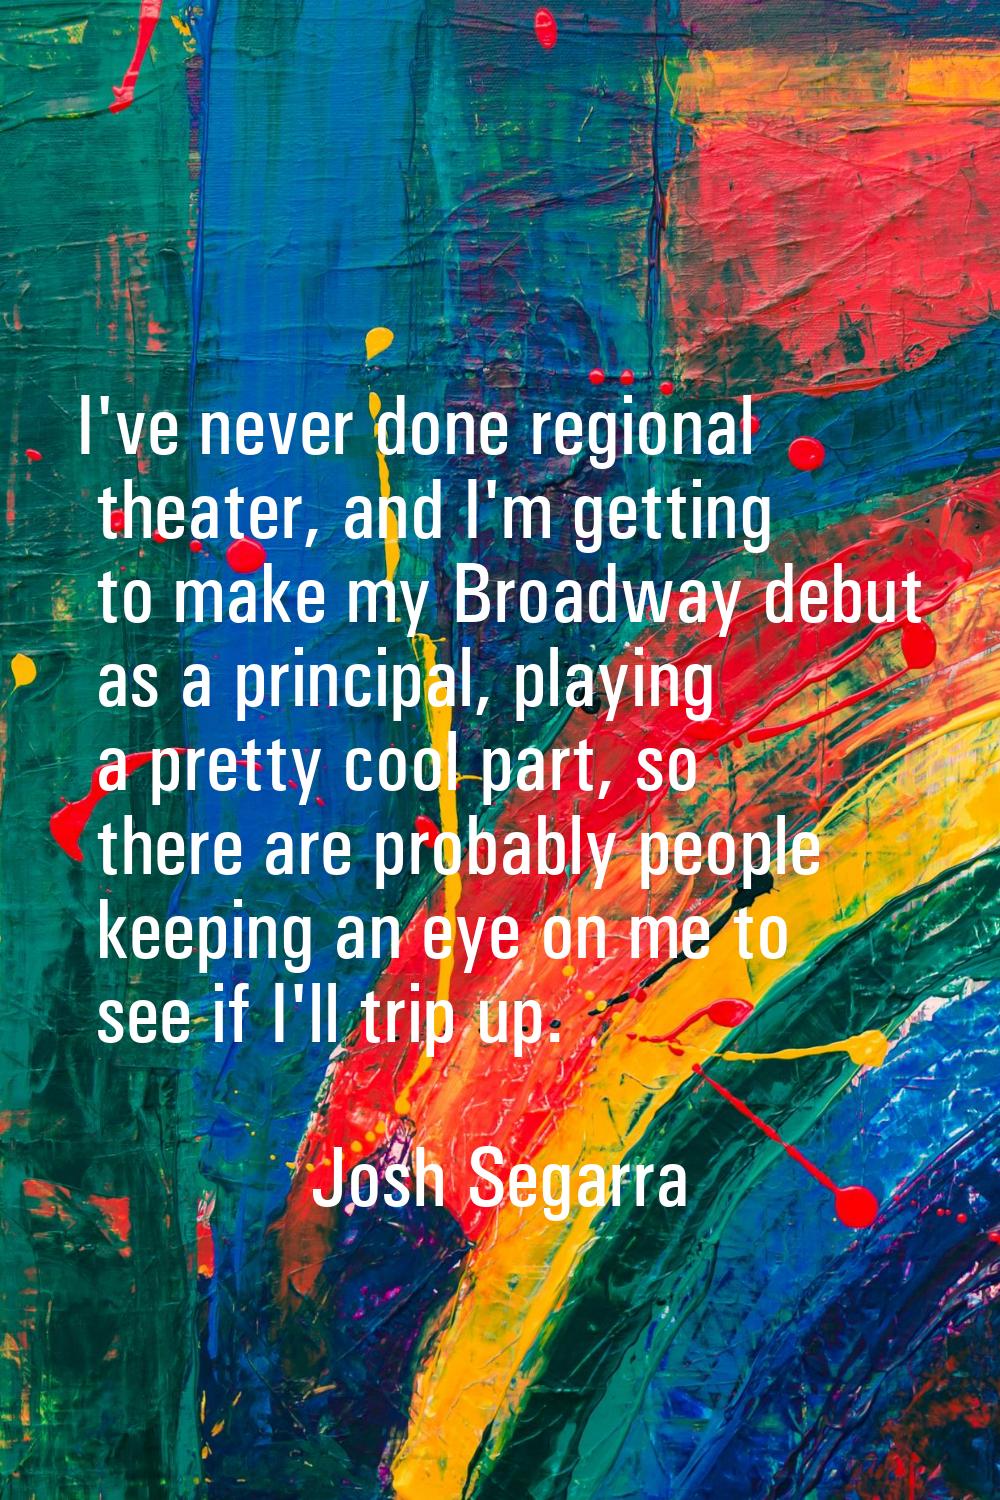 I've never done regional theater, and I'm getting to make my Broadway debut as a principal, playing